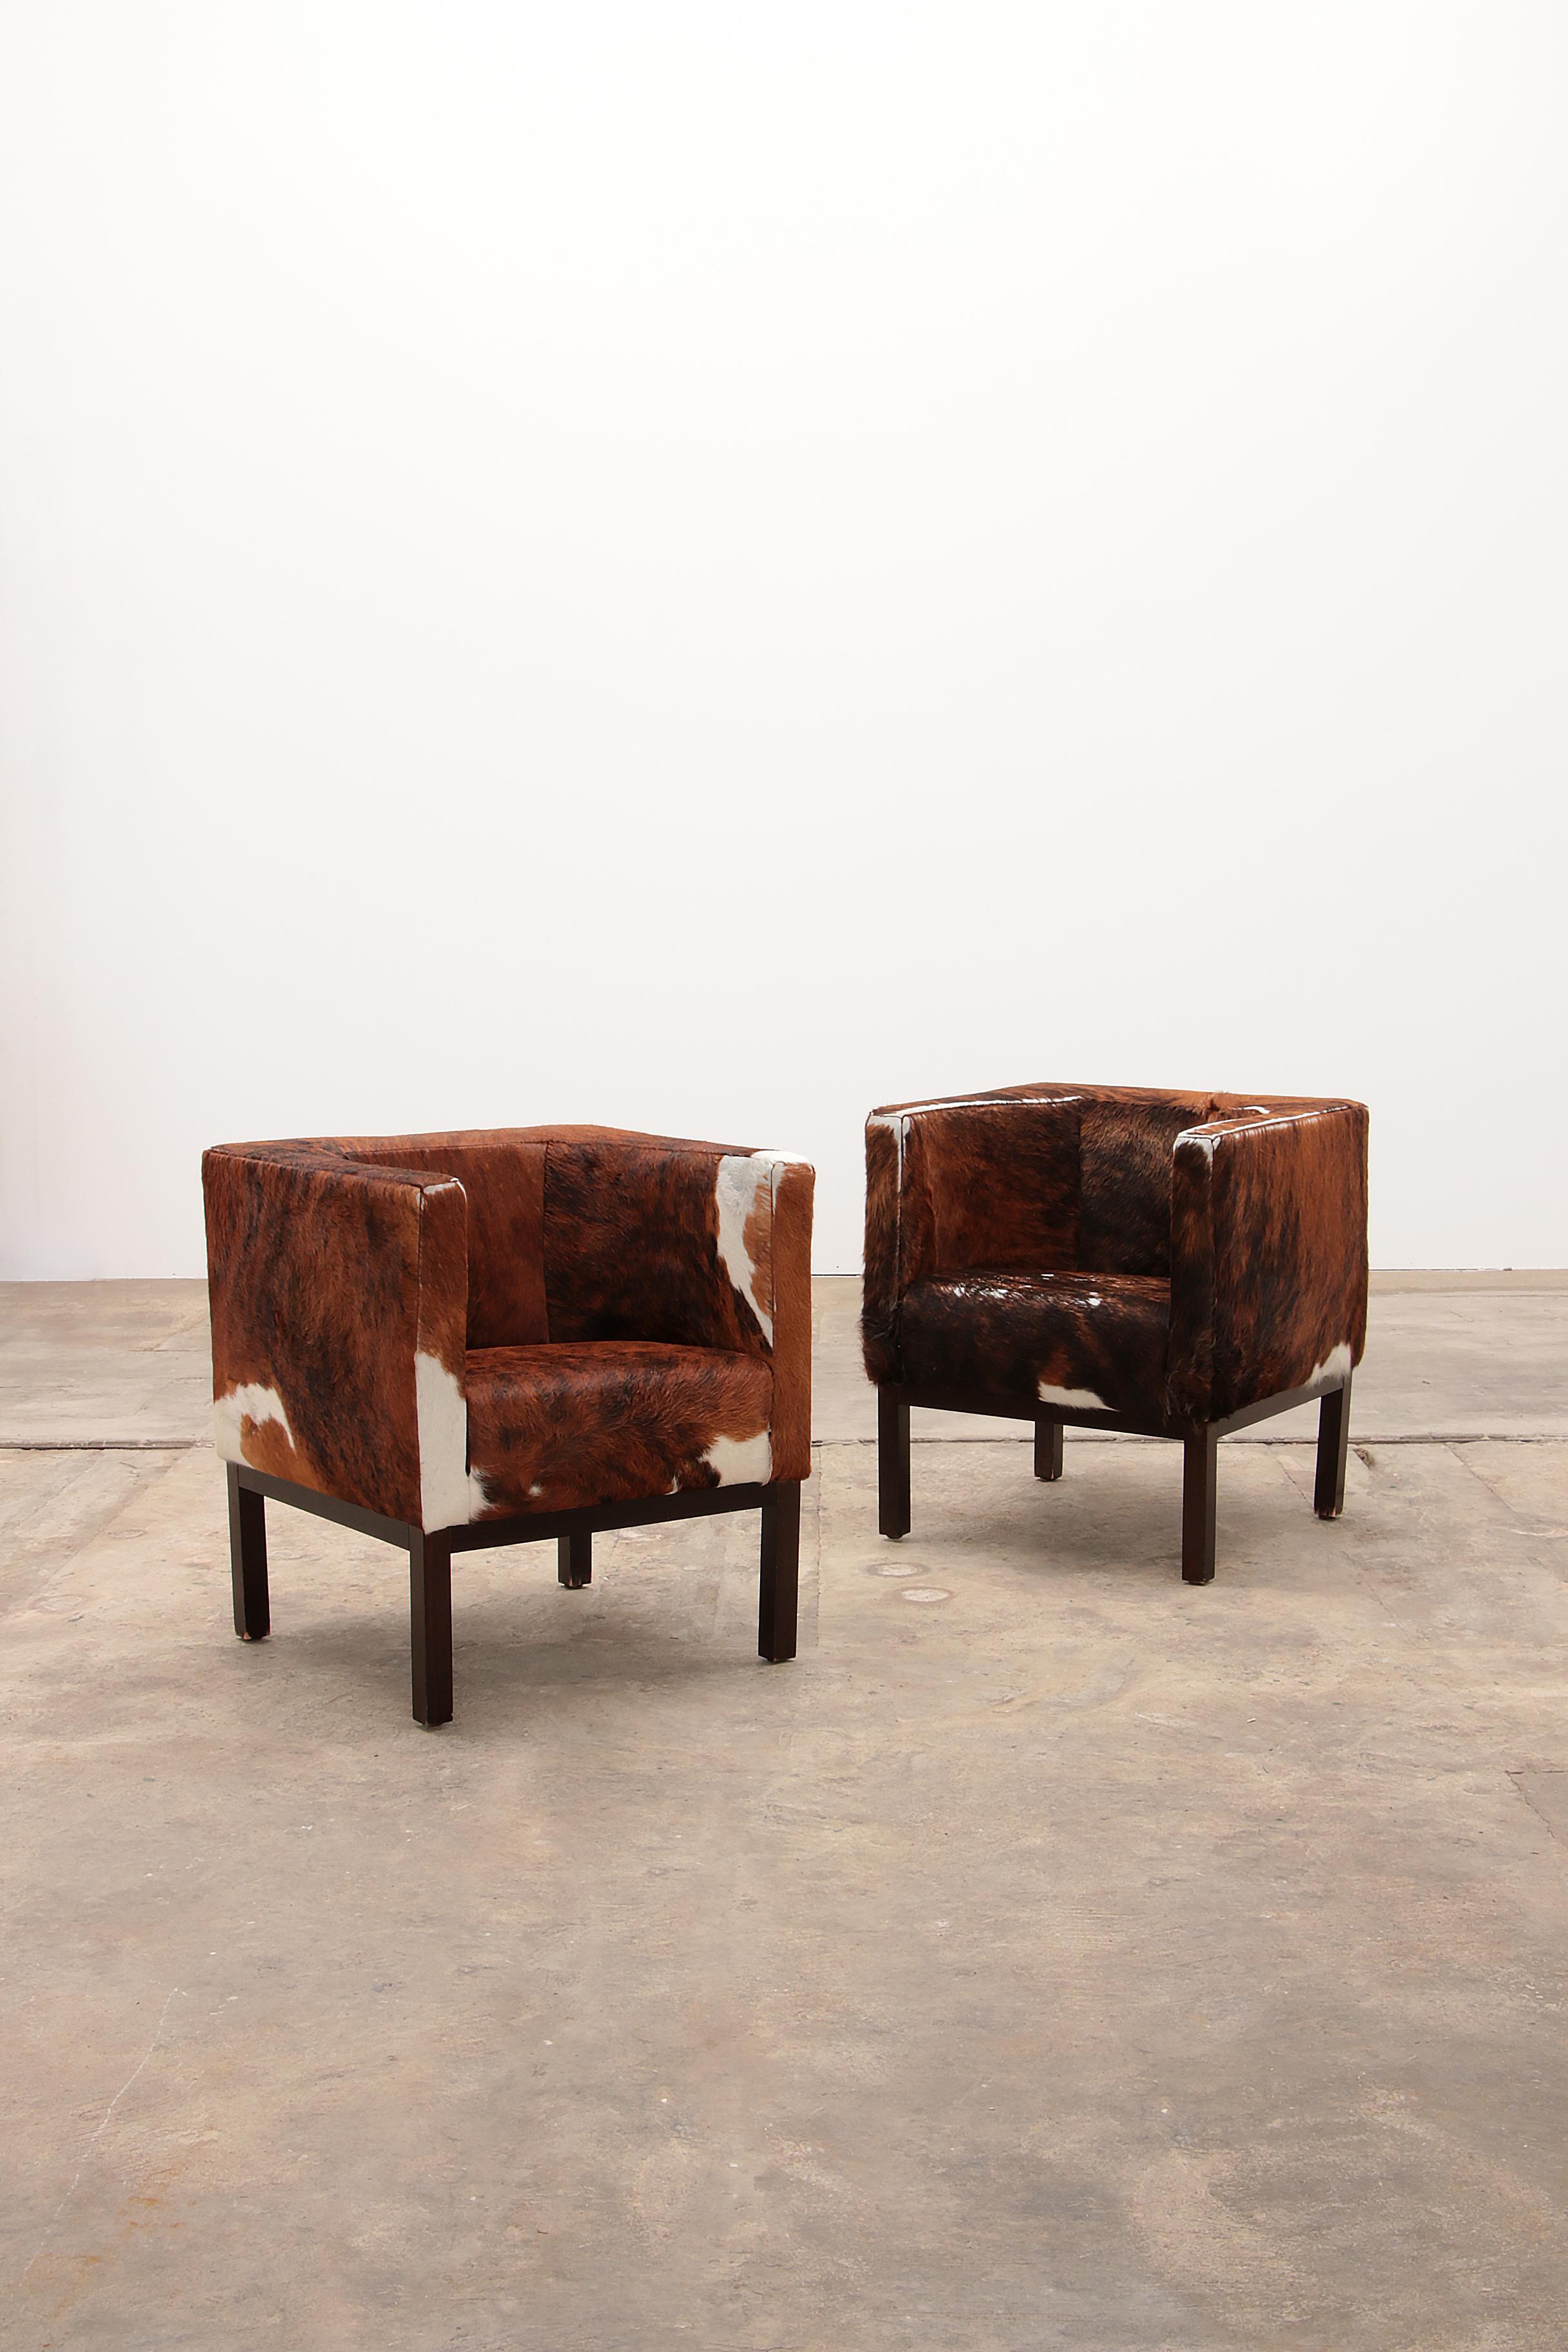 Beautiful set of armchairs made of cowhide with use it has acquired even more appearance. These robust chairs are covered with cowhide. The armchairs have a very strong framework and are made with the best tanned hides available.

The seat of the